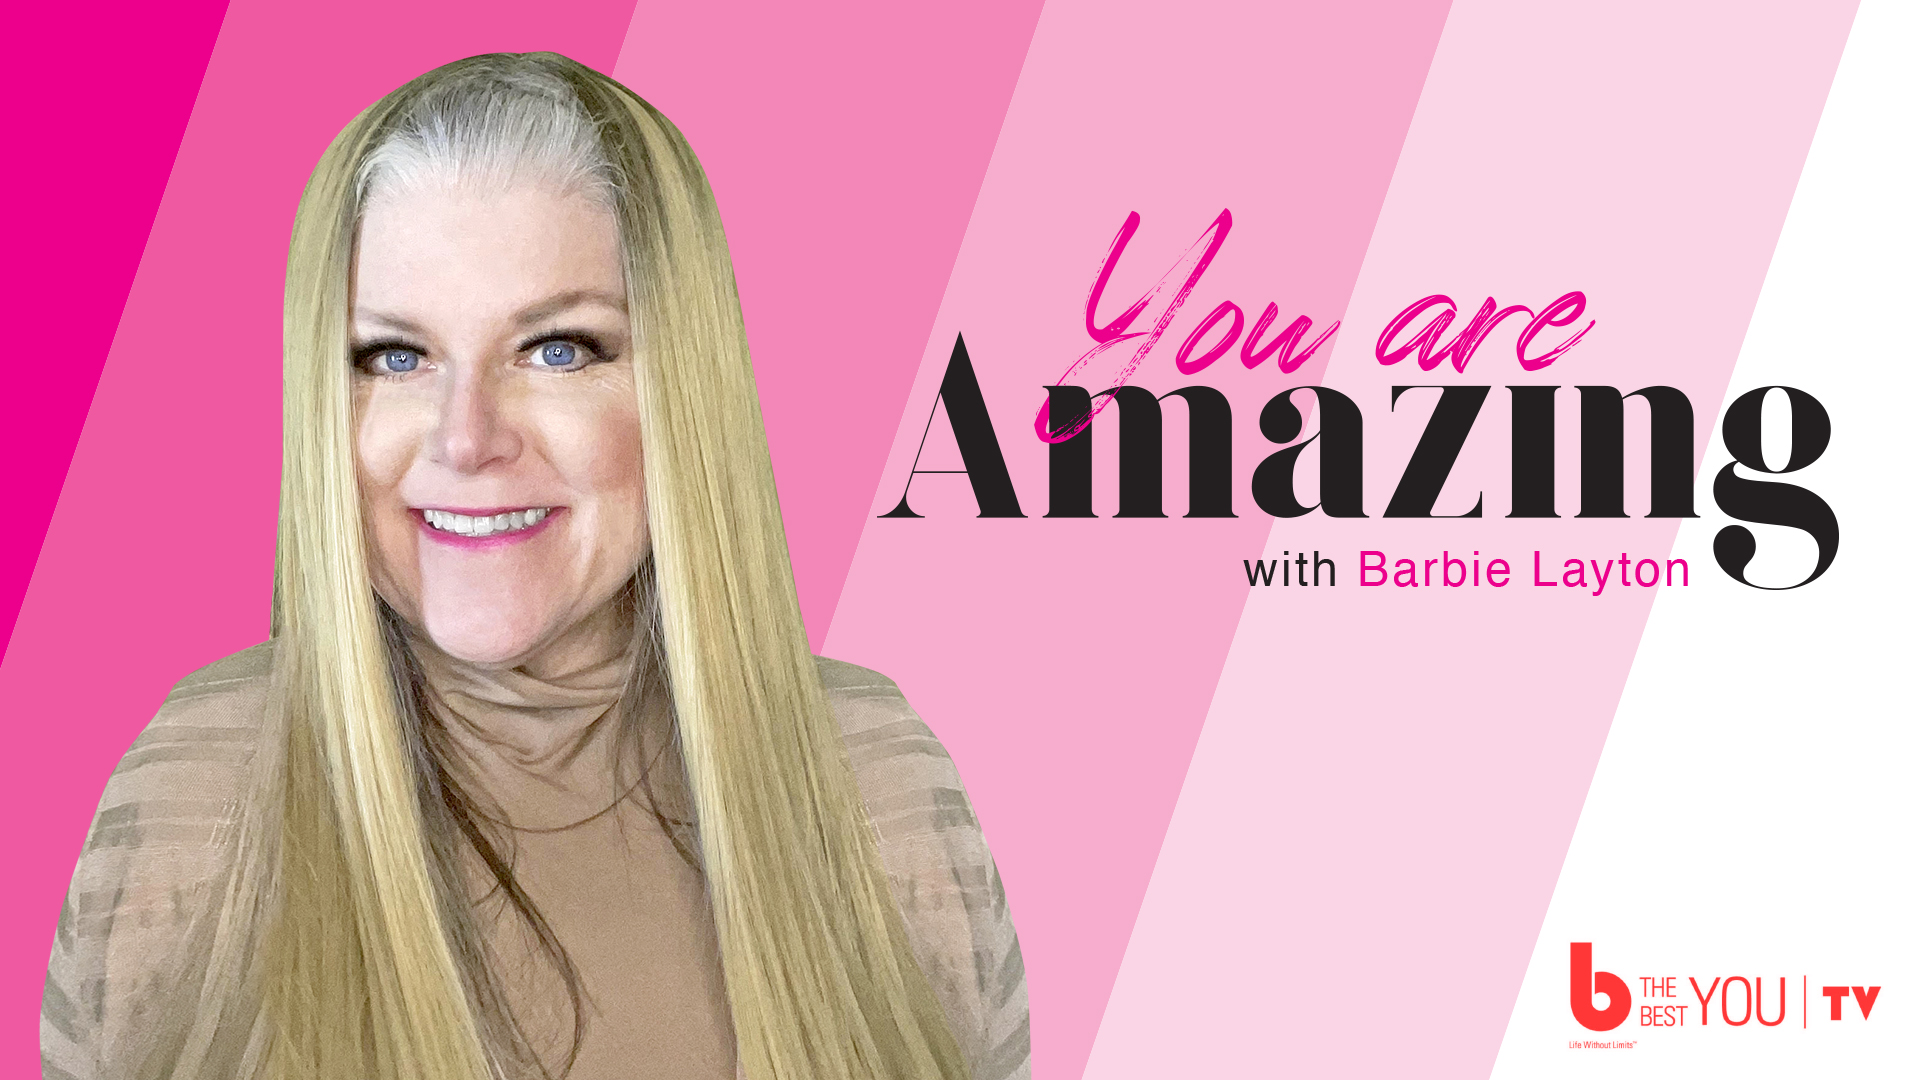 You Are Amazing - Barbie Layton with Diana Wentworth